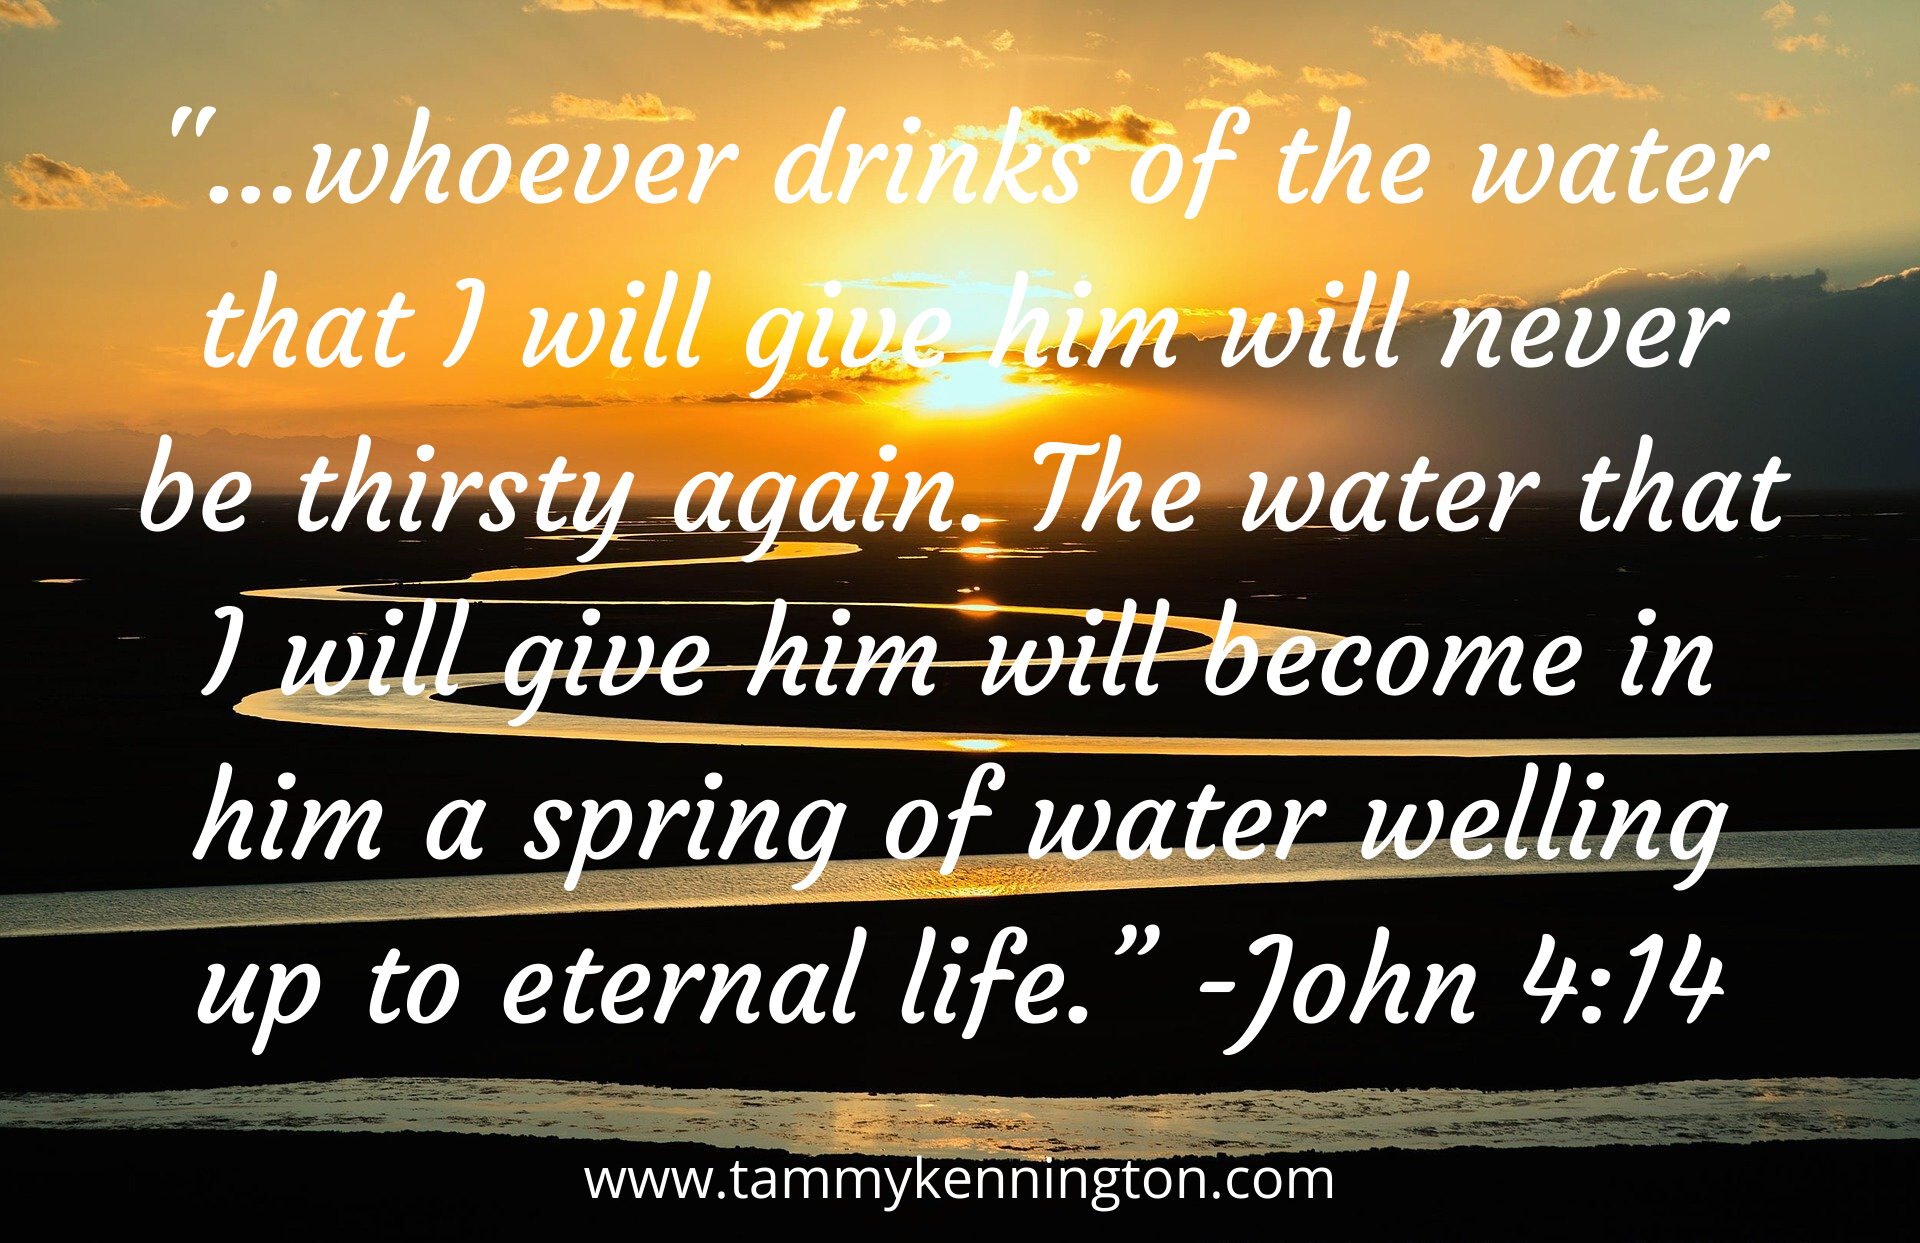 _...whoever drinks of the water that I will give him will never be thirsty again. The water that I will give him will become in him a spring of water welling up to eternal life.” - Copy